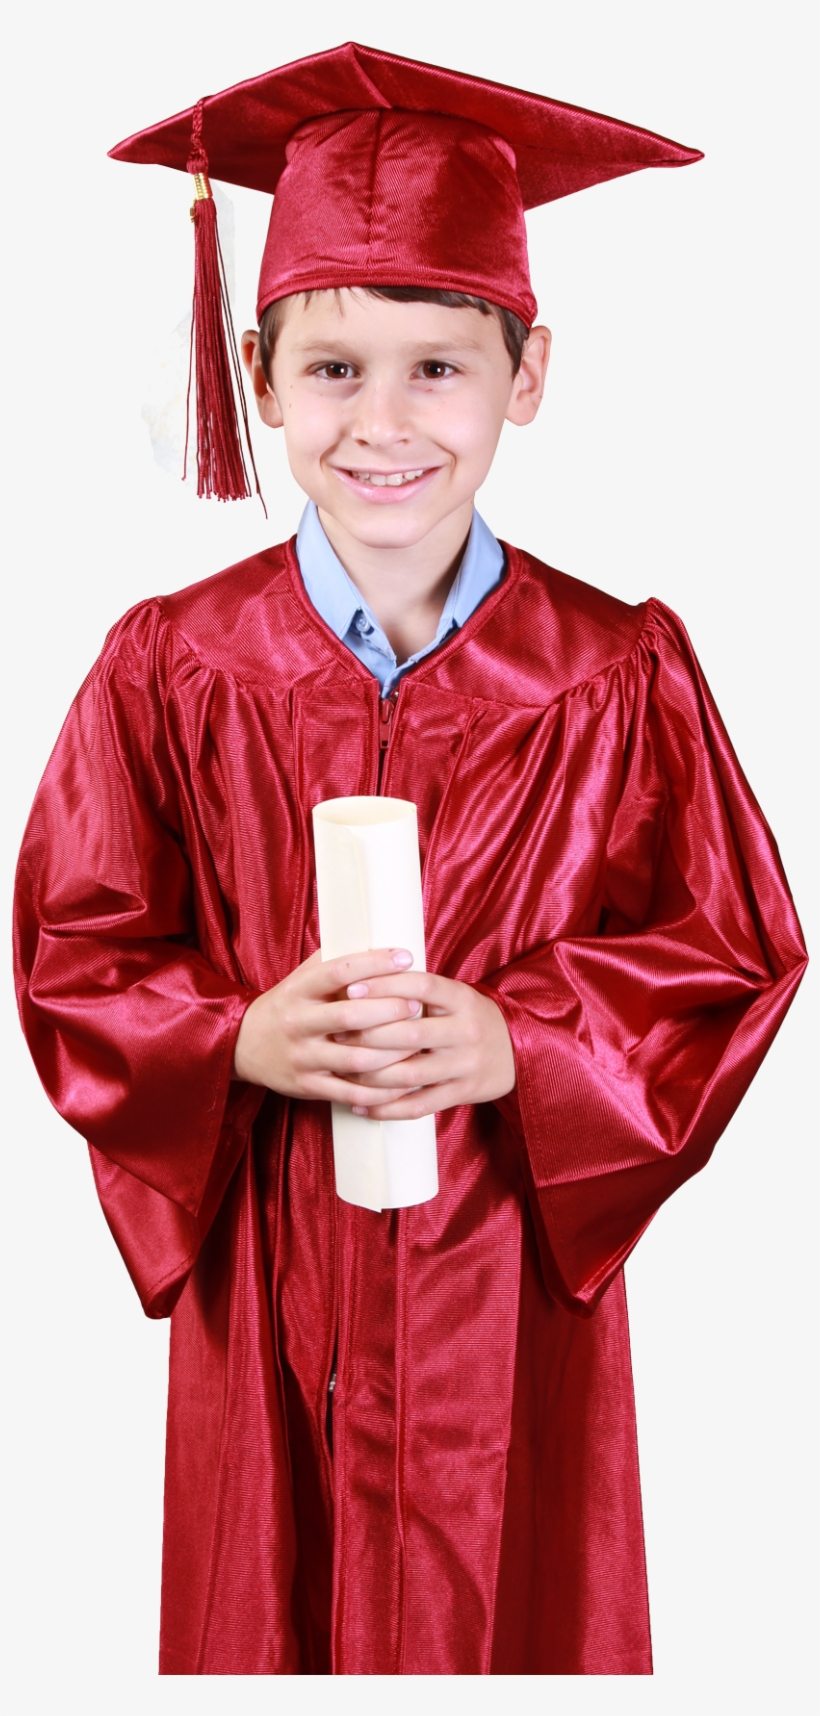 8,161 Cap Gown Icon Royalty-Free Photos and Stock Images | Shutterstock